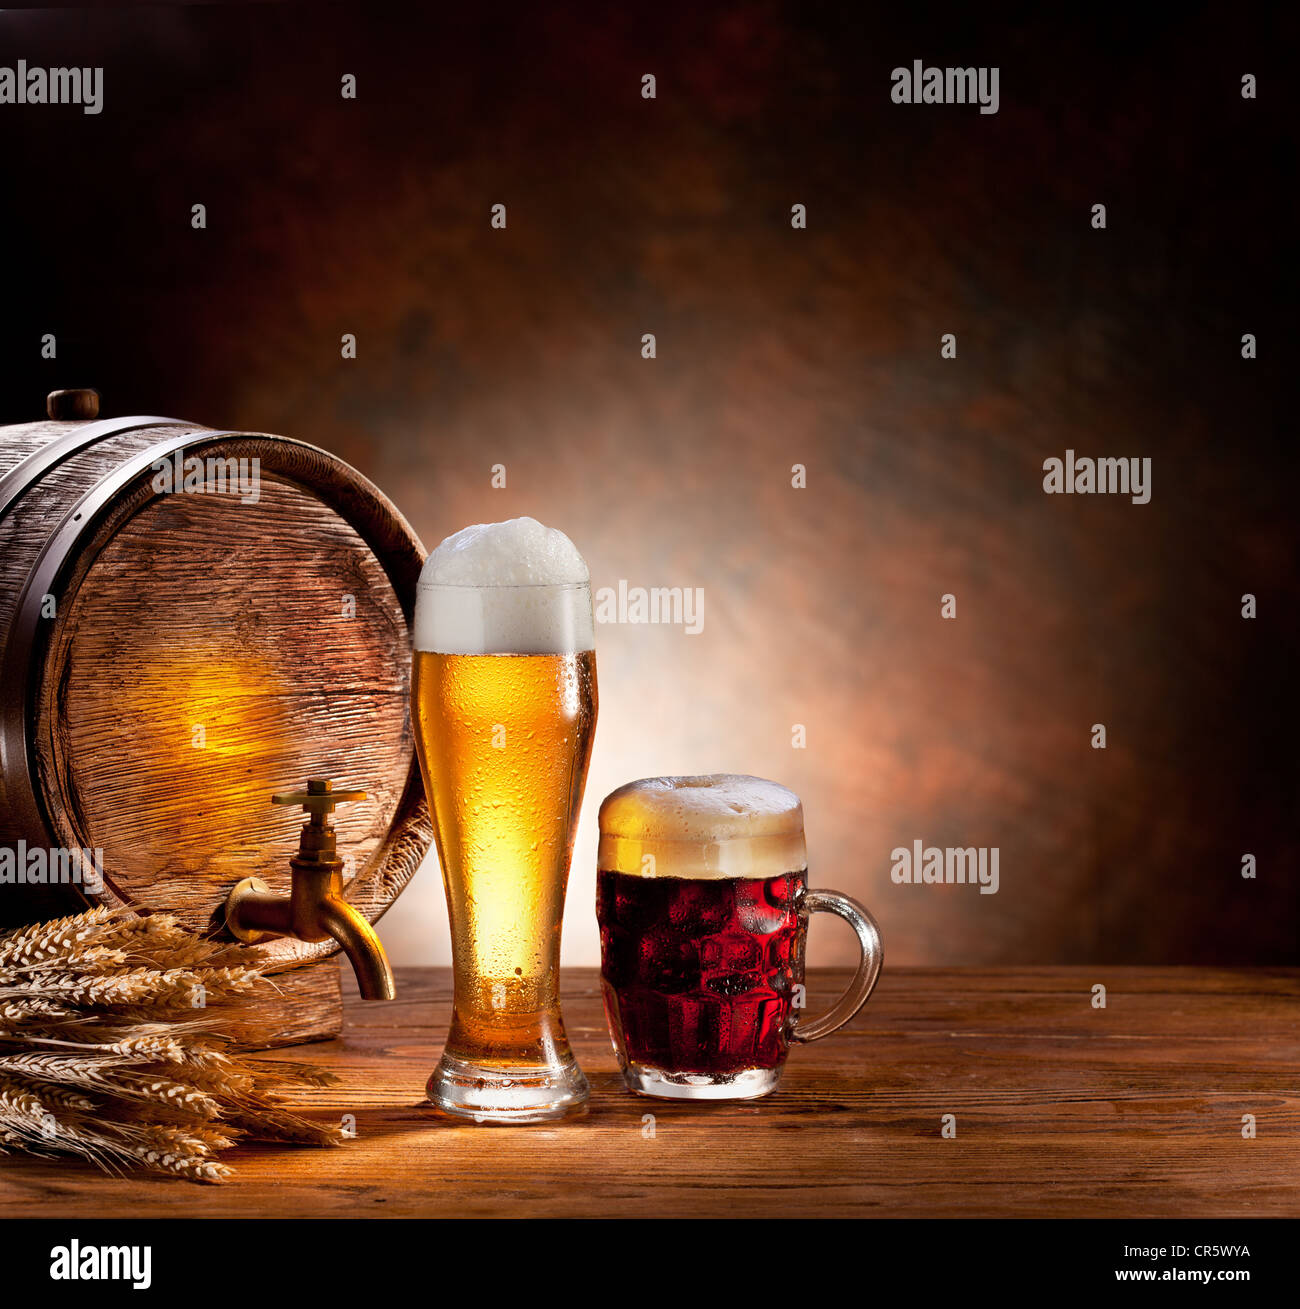 Beer barrel with beer glasses on a wooden table. The dark background. Stock Photo